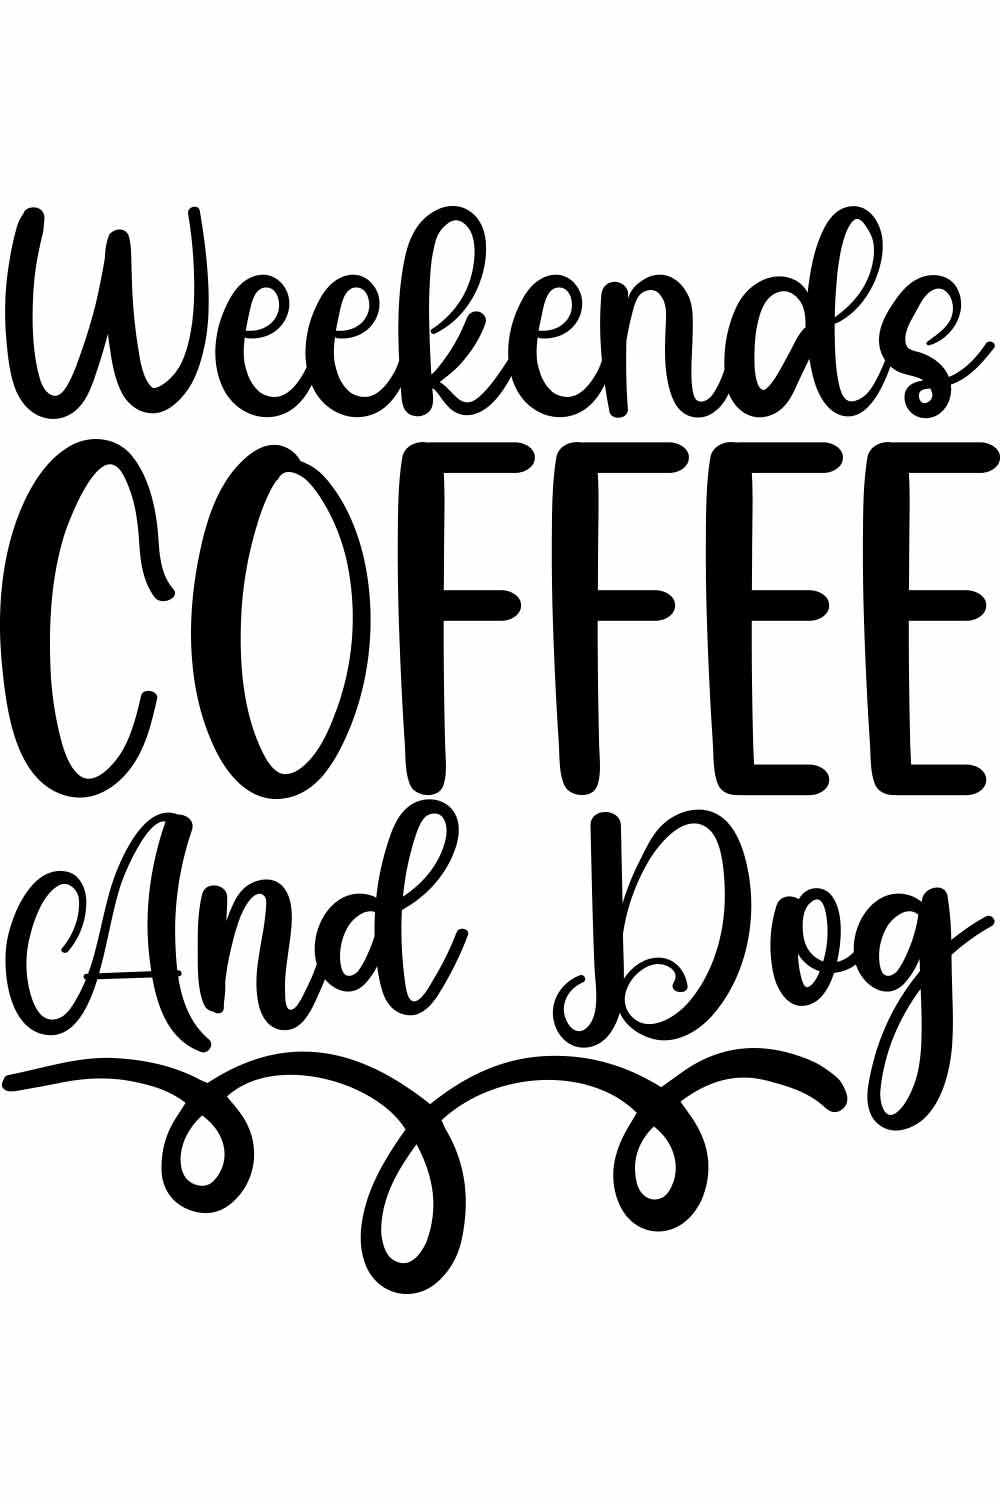 Weekends coffee and dog SVG t-shirt Designs pinterest preview image.